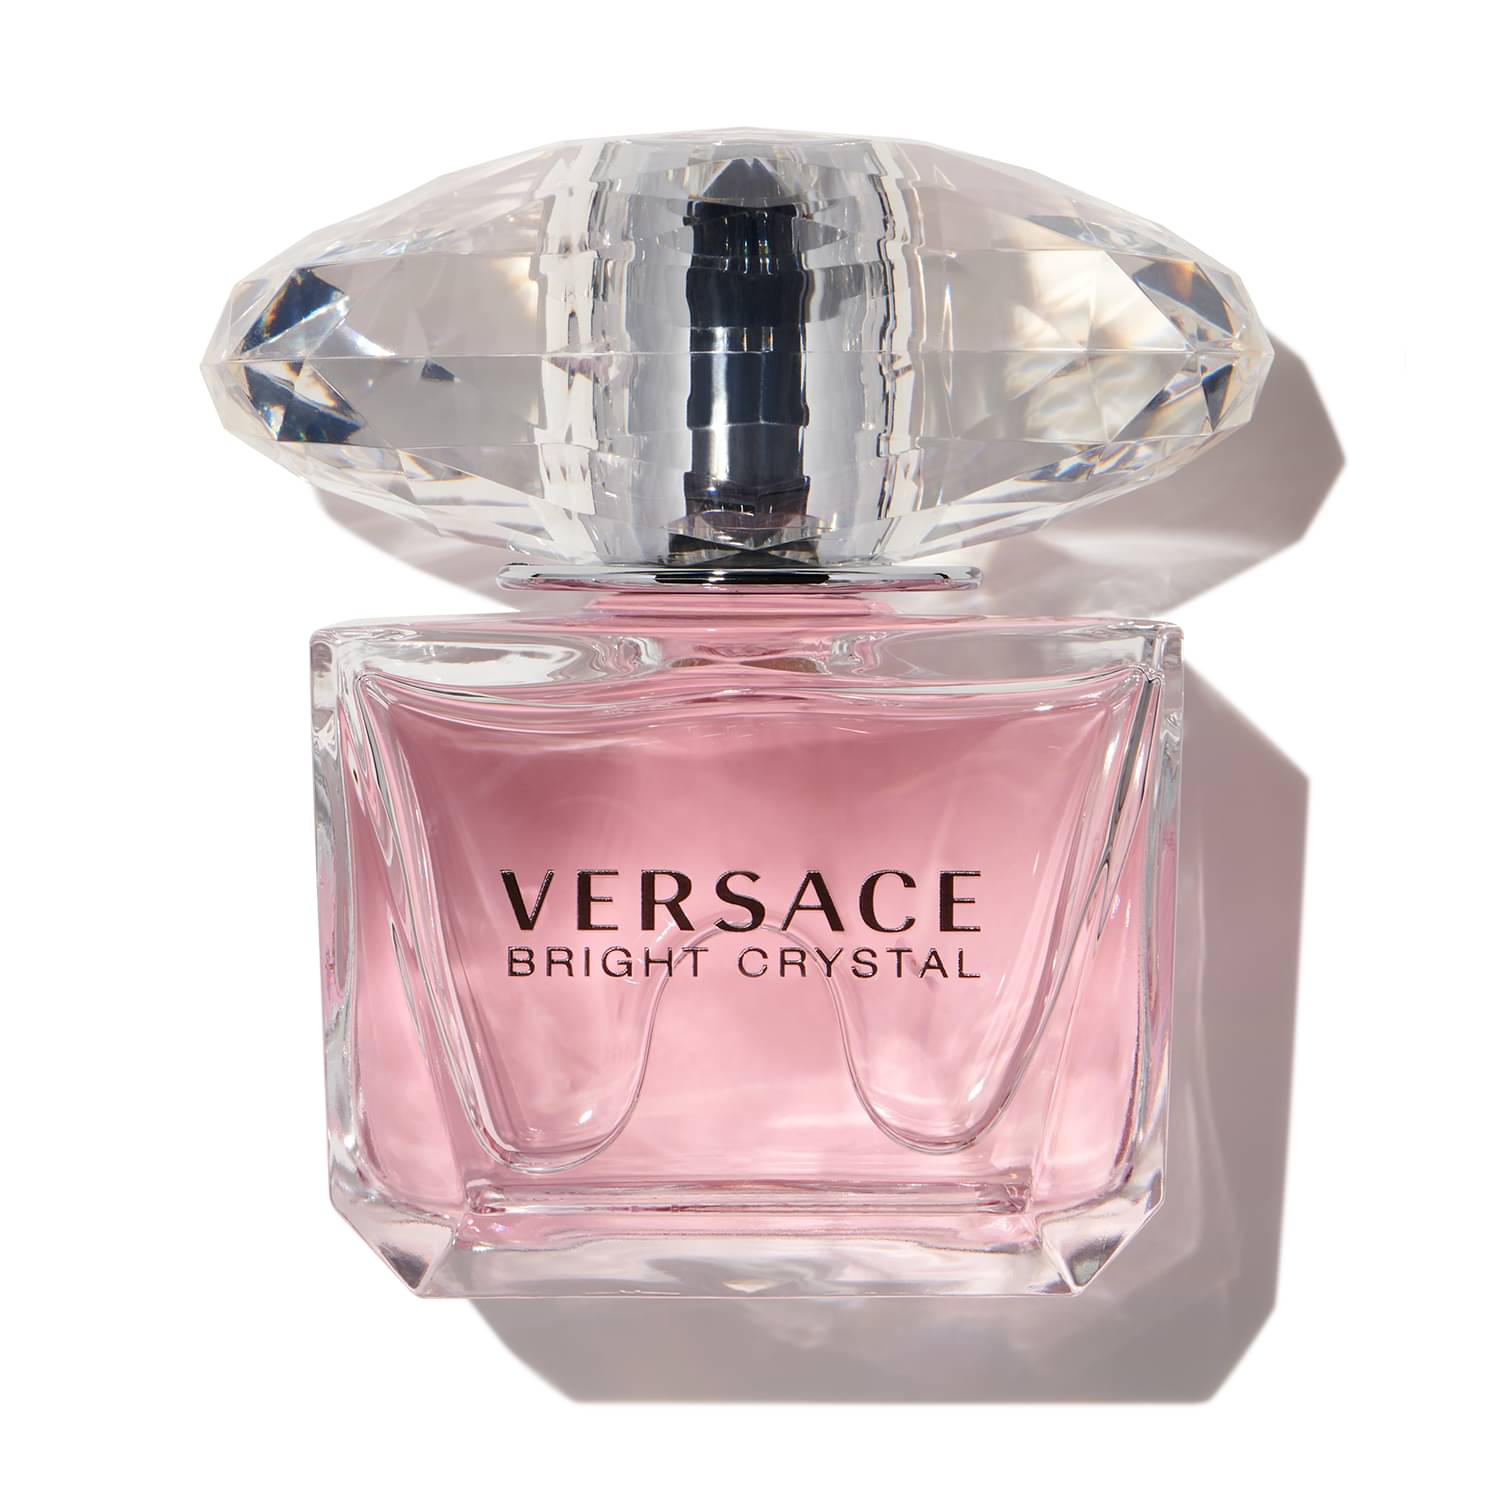 Versace Woman Perfume Review / Perfume Of The Month 